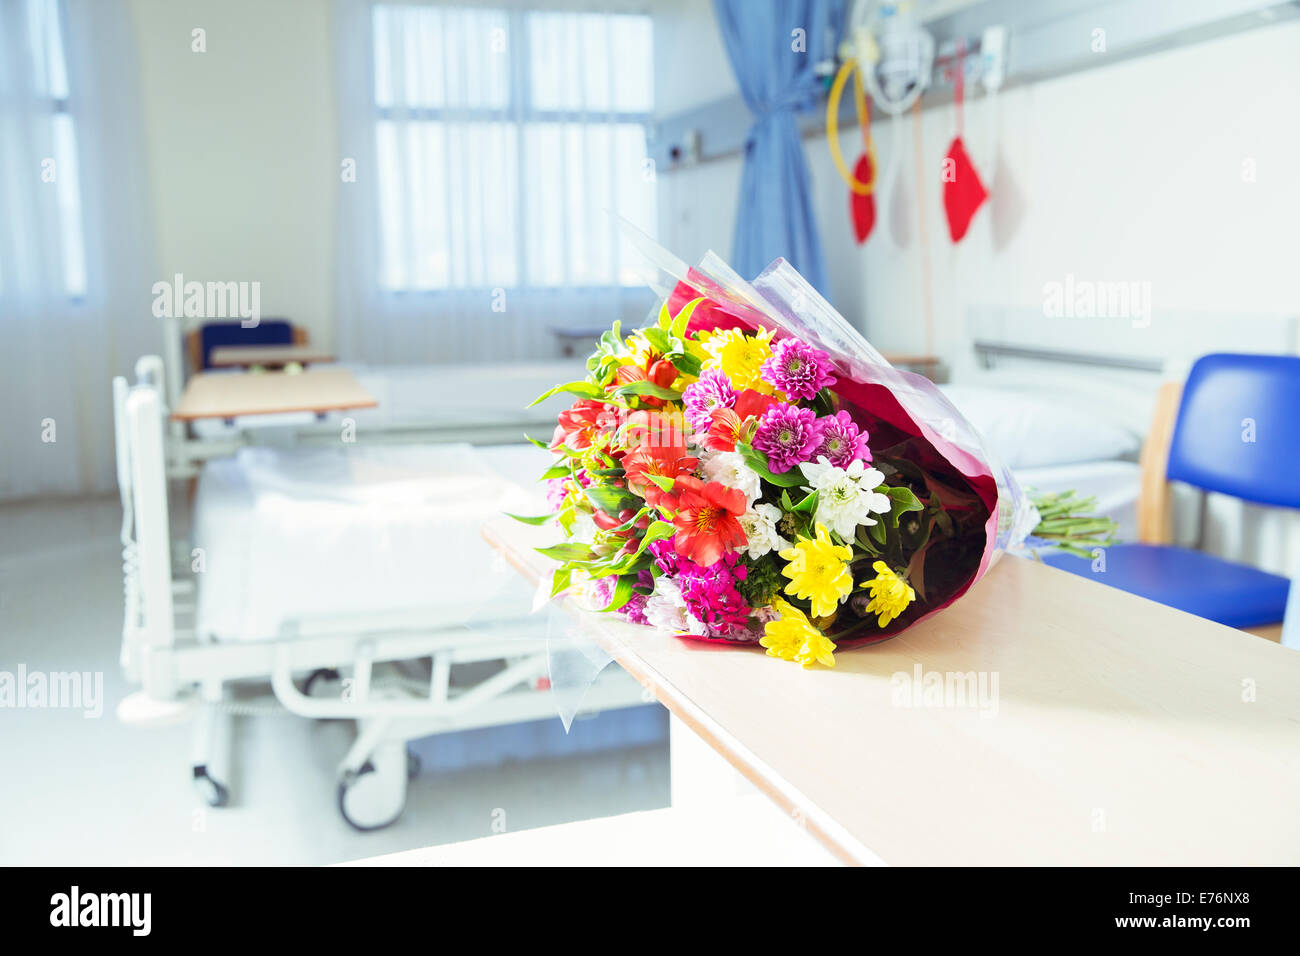 Bouquet of flowers in hospital room Stock Photo